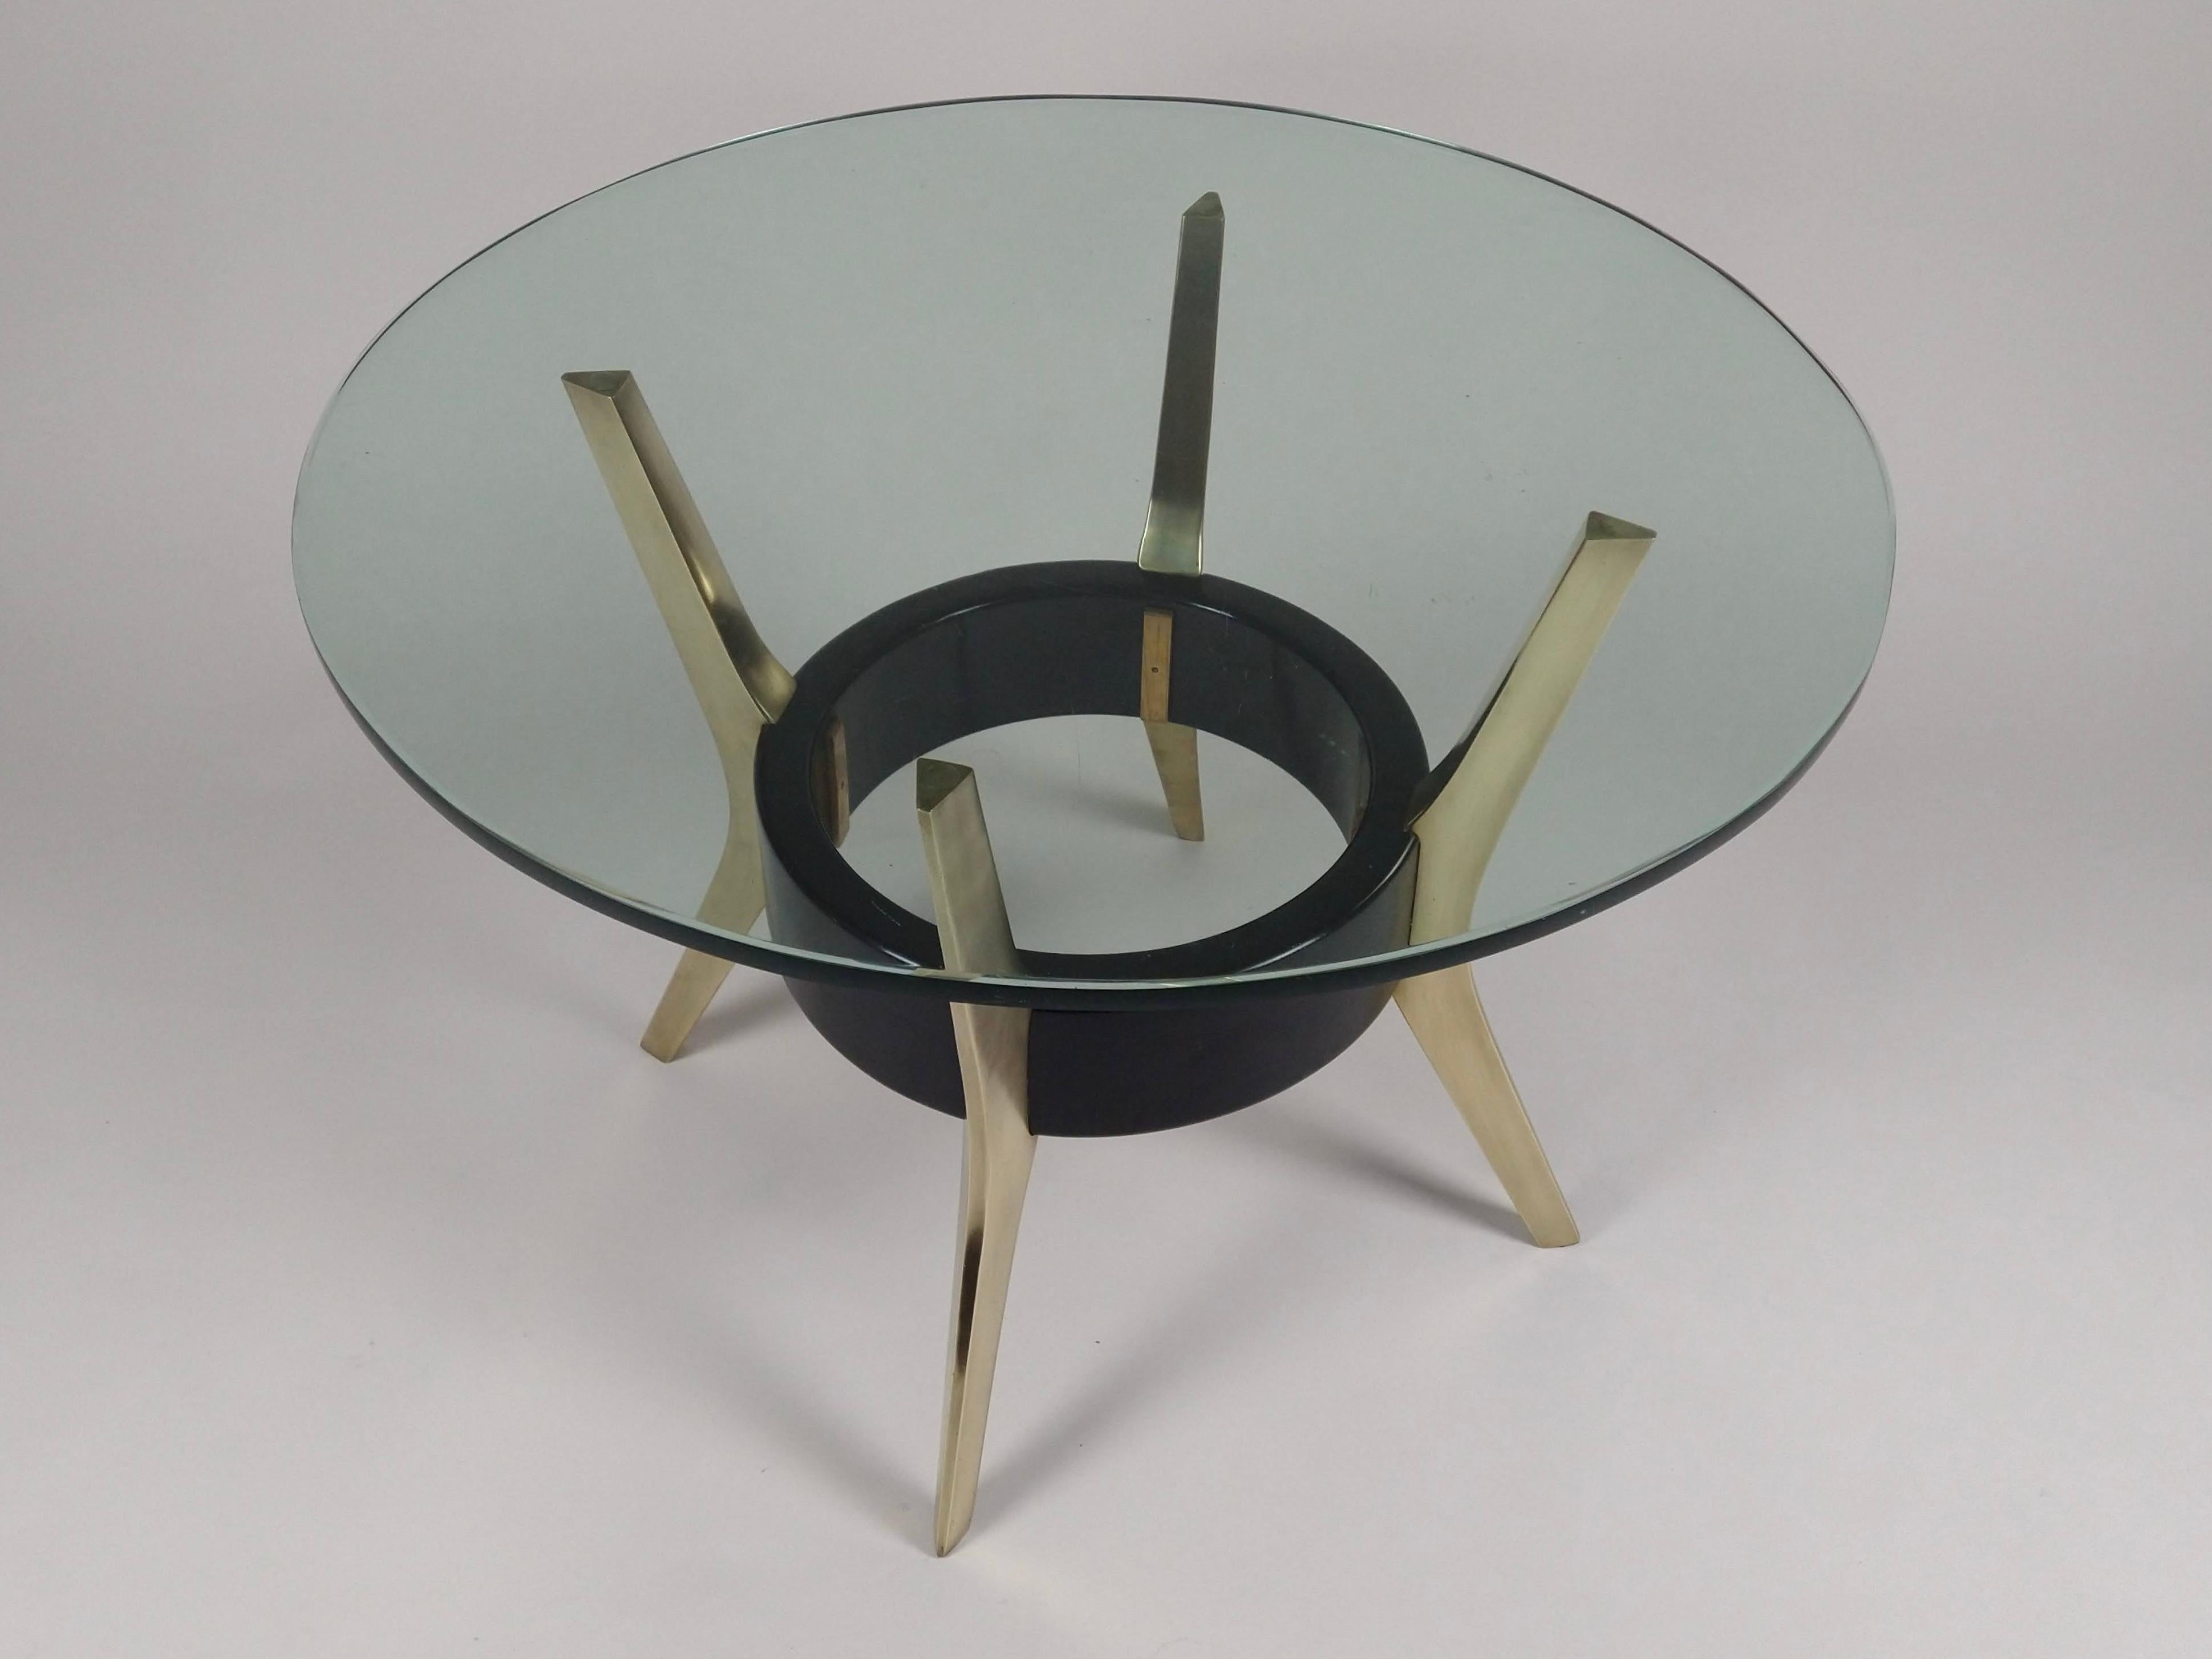 An Italian, circular black-lacquered coffee table with a thick beveled glass top. Four solid brass curved leg supports are held together by a circular ebonised stretcher within the frame. A fine quality mid-century side table.